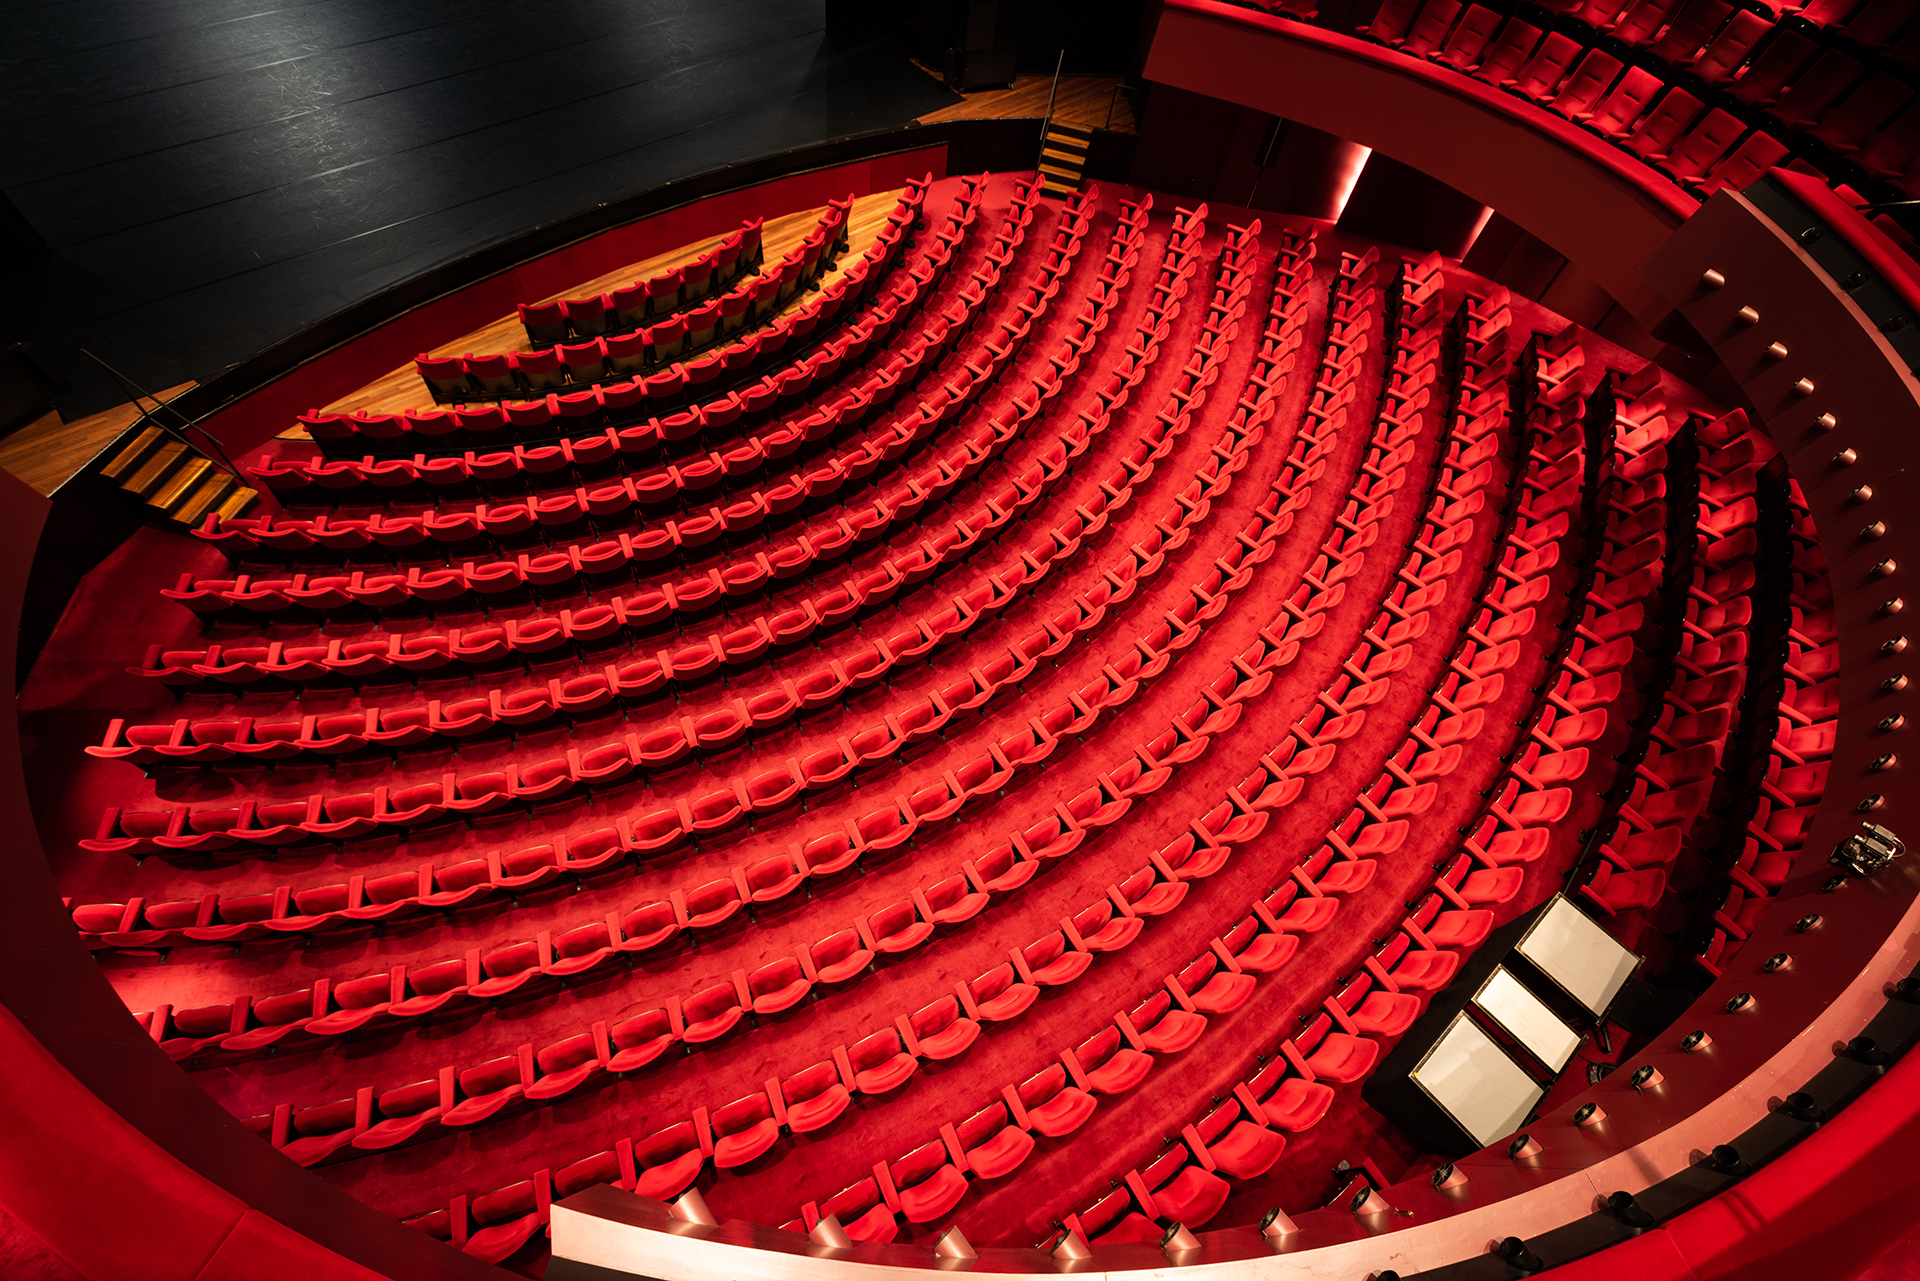 Theaters Tilburg grote zaal -3967